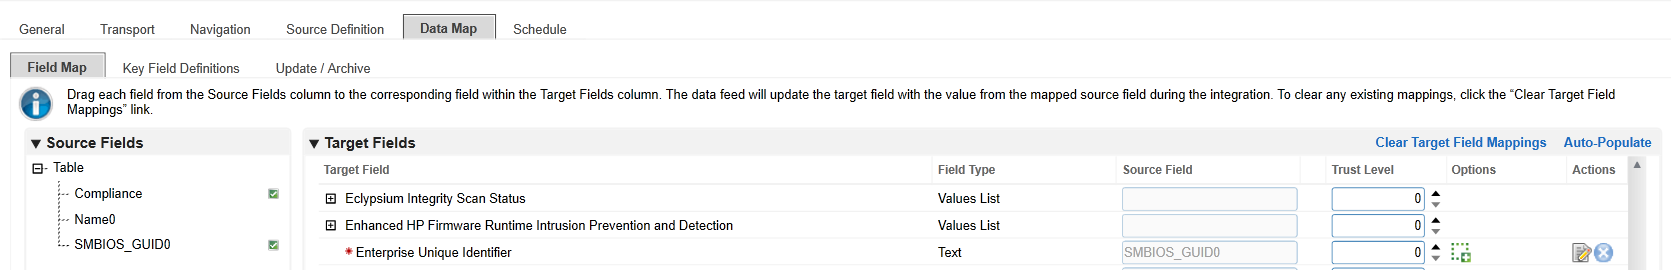 Screenshot of the Field Map sub-tab in the Data Map tab in the Data Feed Manager